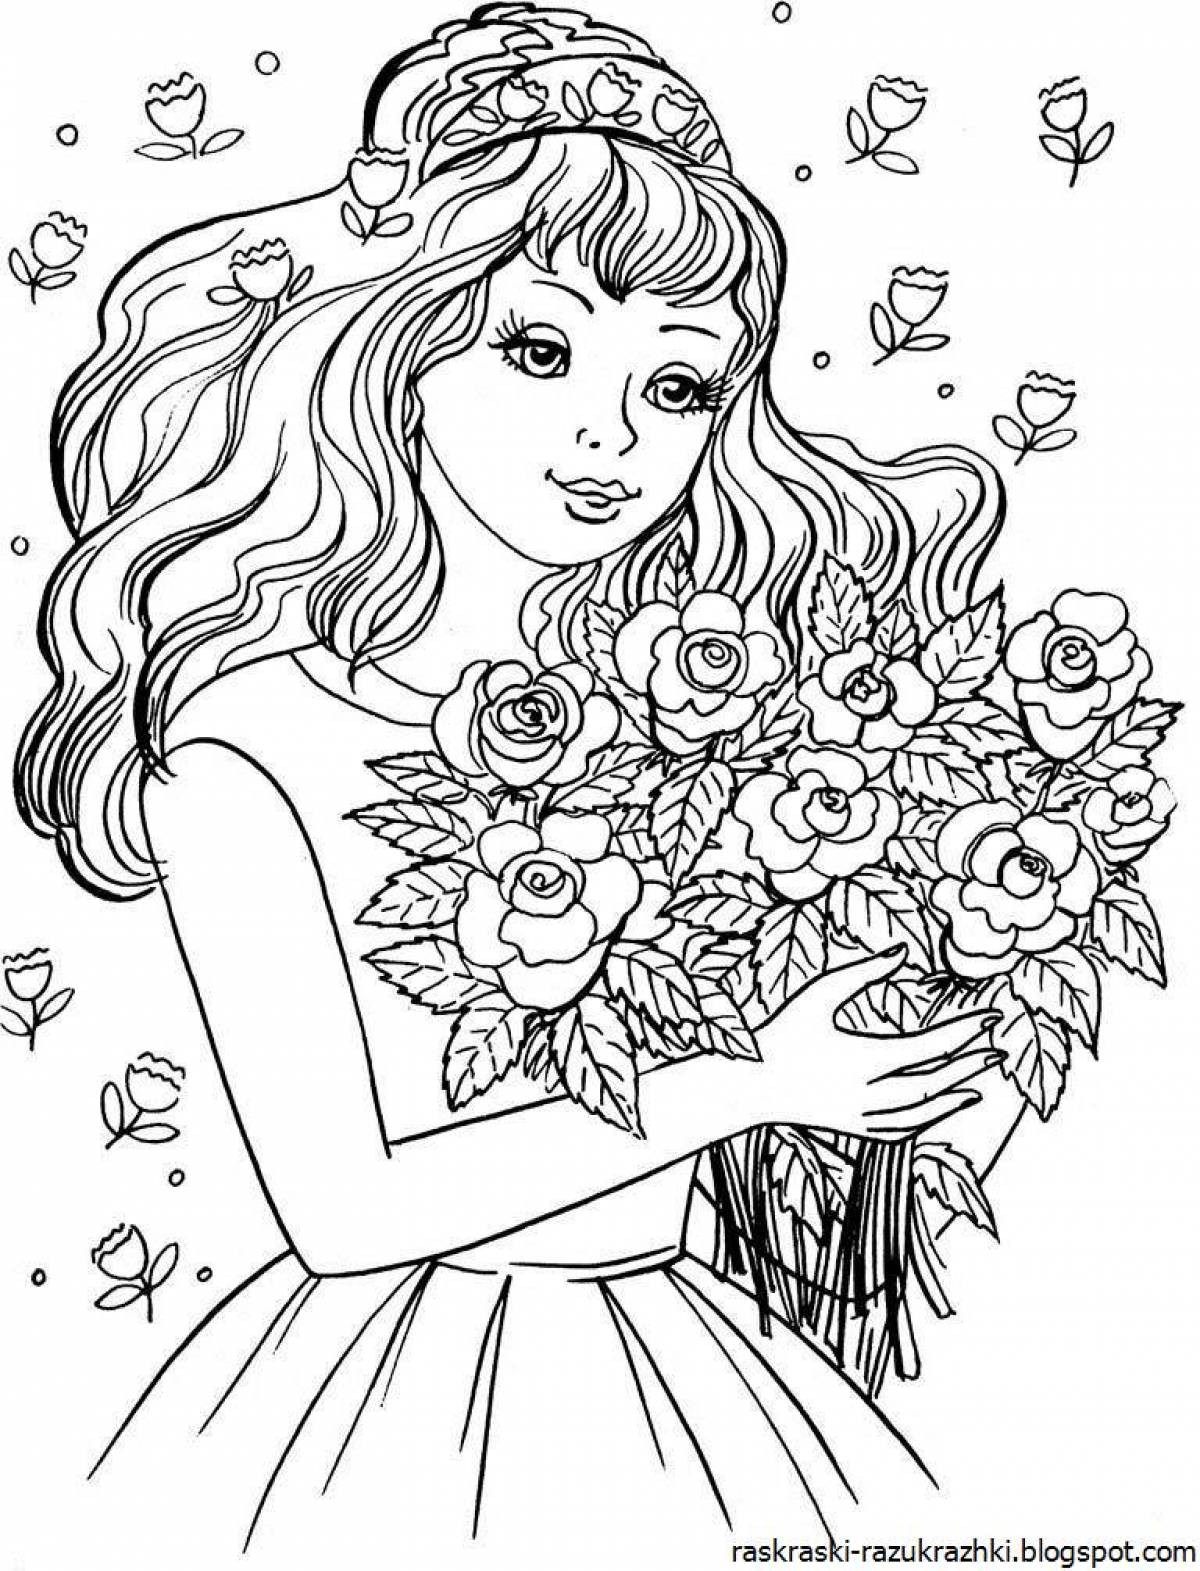 Charming coloring book for girls 7 years old